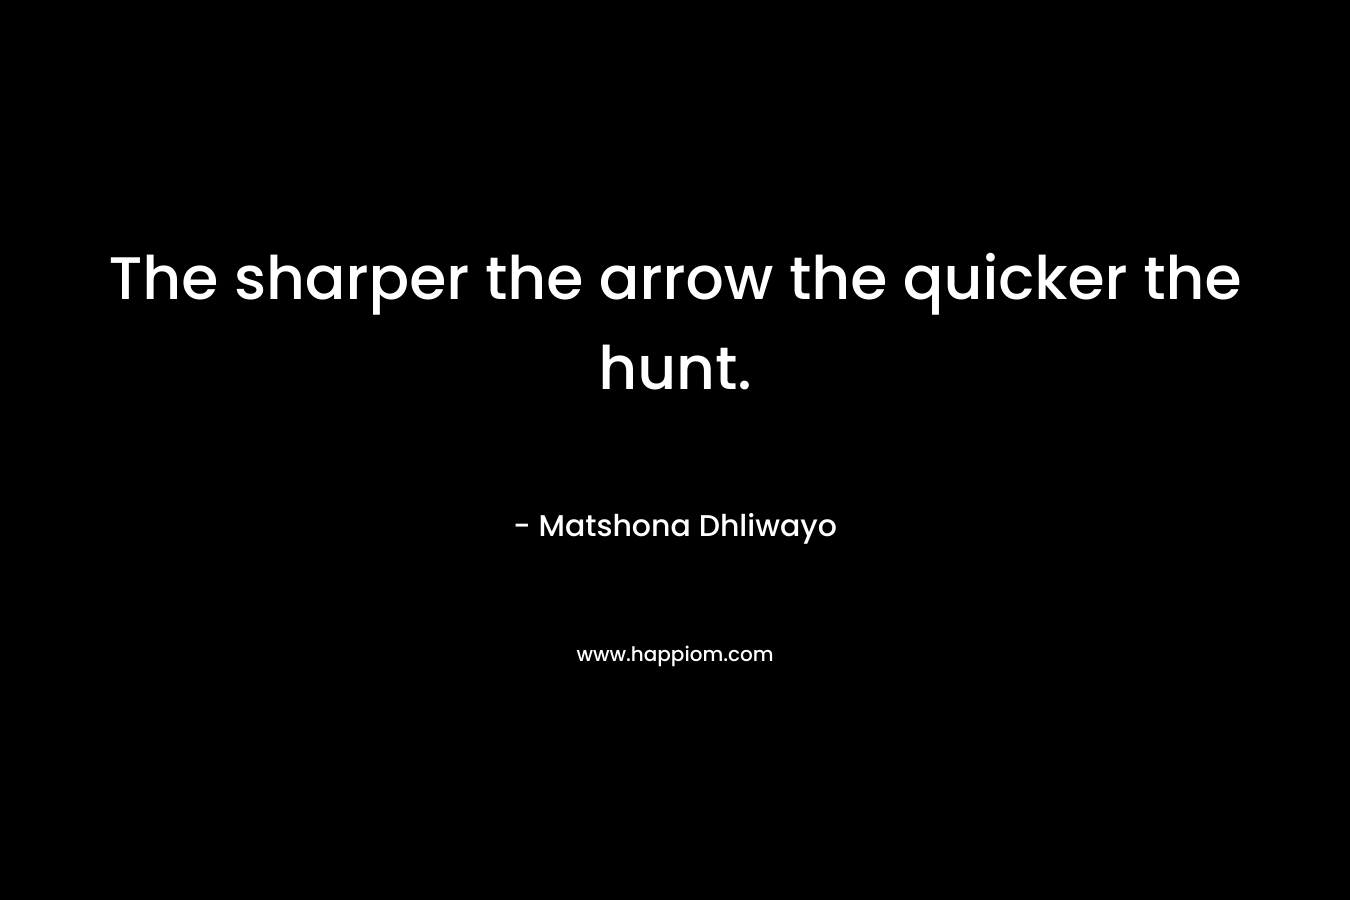 The sharper the arrow the quicker the hunt.